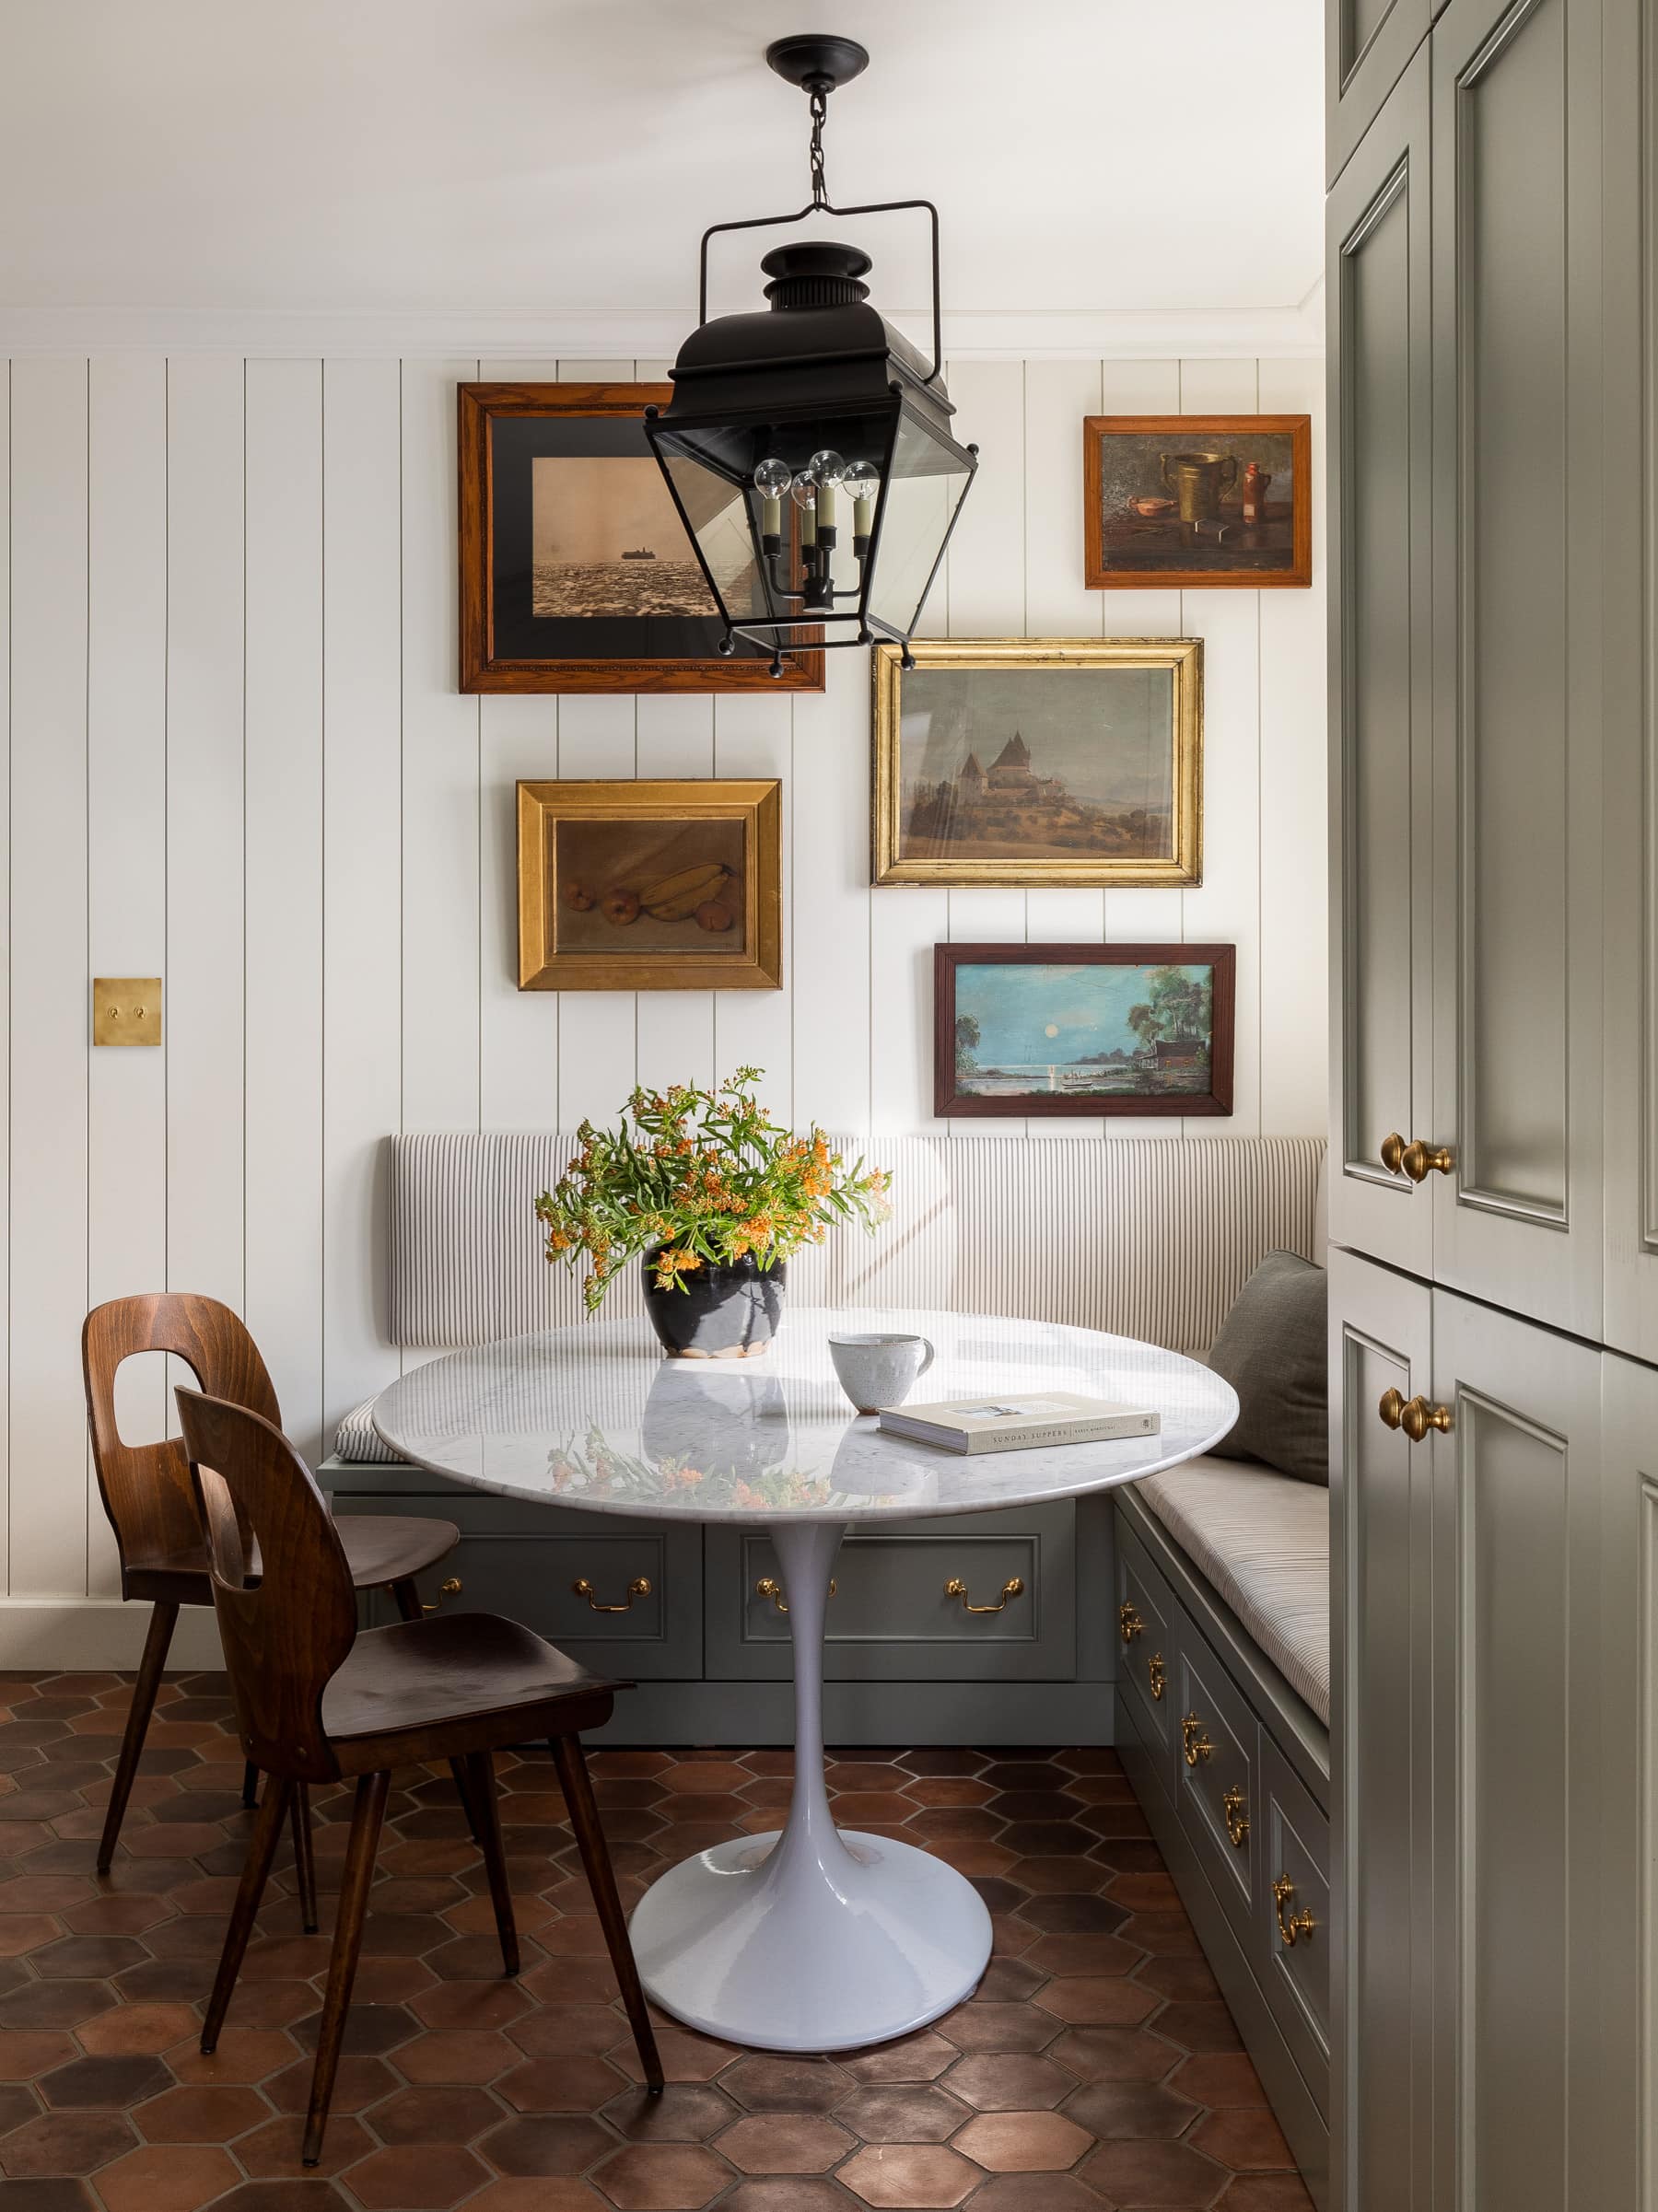 home tour featuring kitchen breakfast nook in vintage cottage style